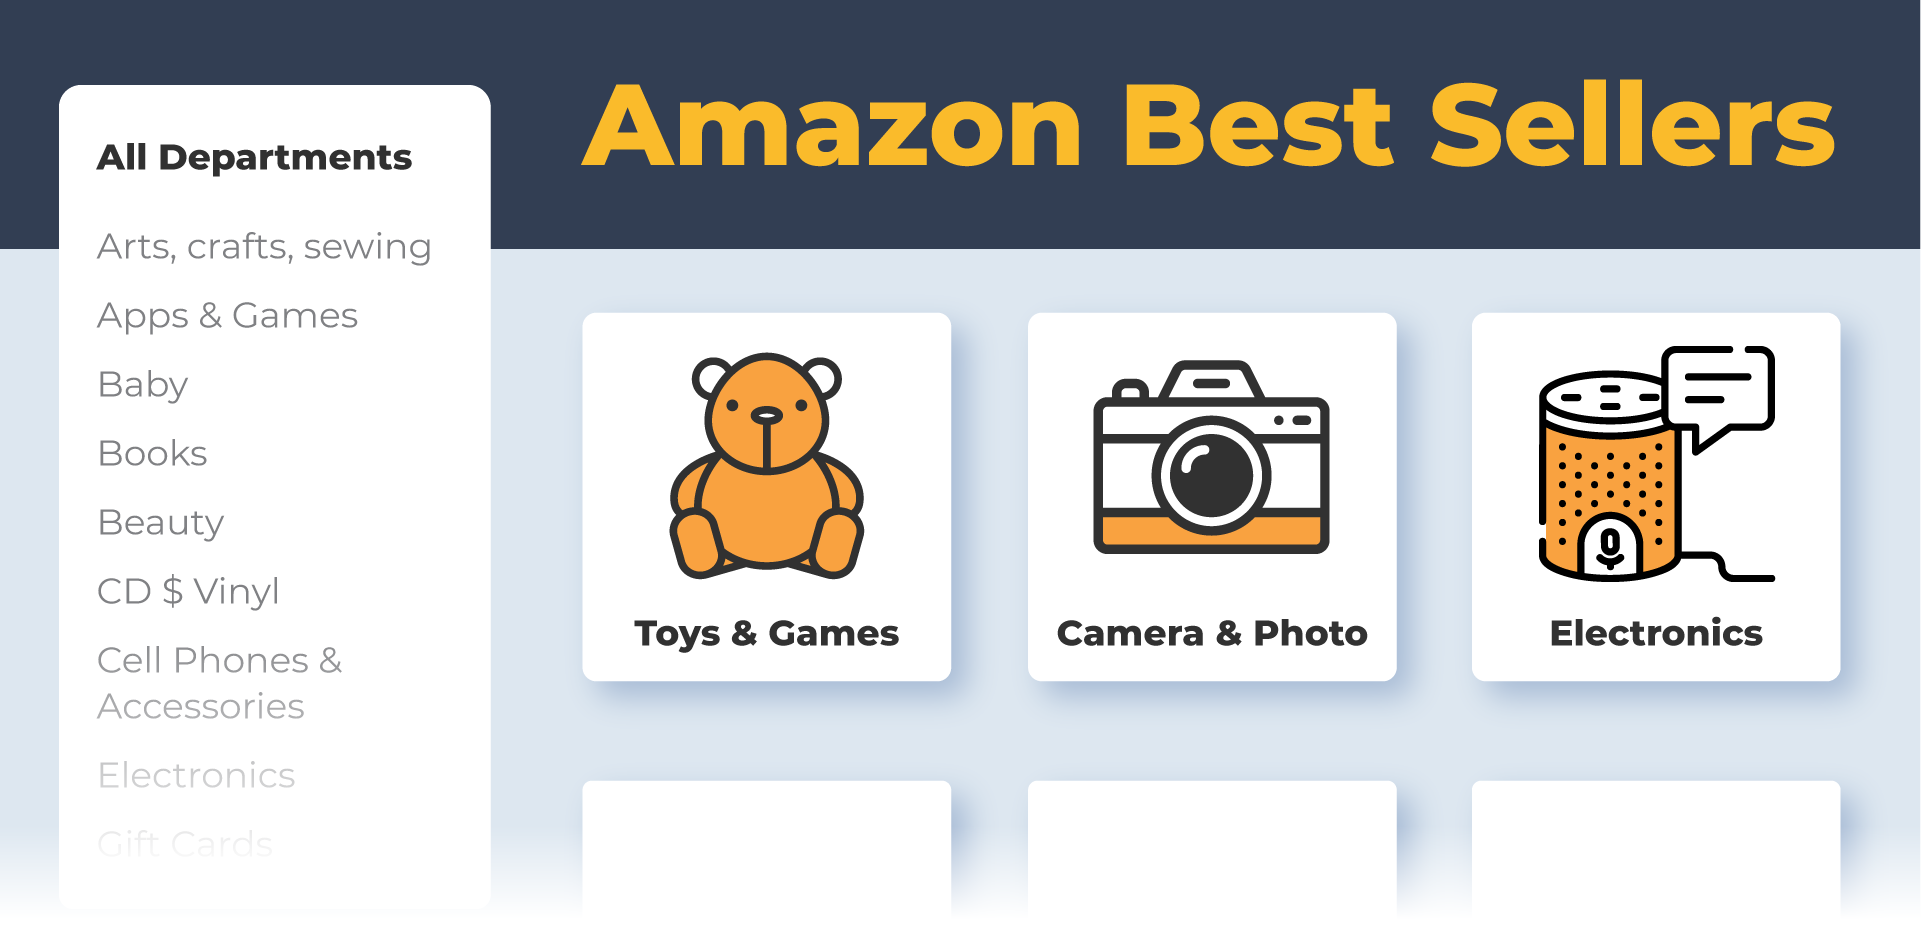 Use the Amazon Best Sellers Page to find products